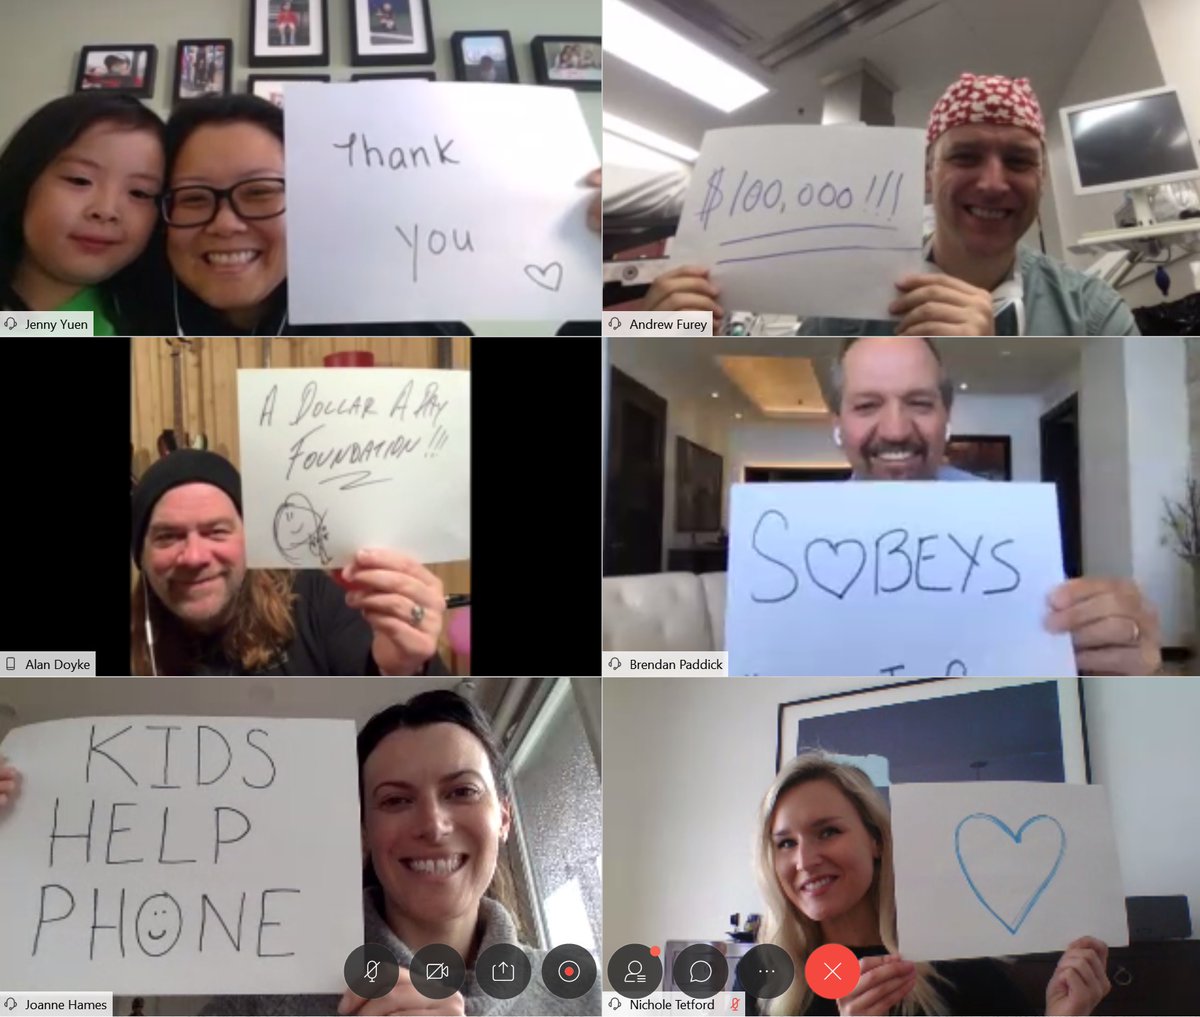 A huge thanks to everyone for helping us raise $100,000 through @alanthomasdoyle's Facebook Live Sessions!

#sharethechange